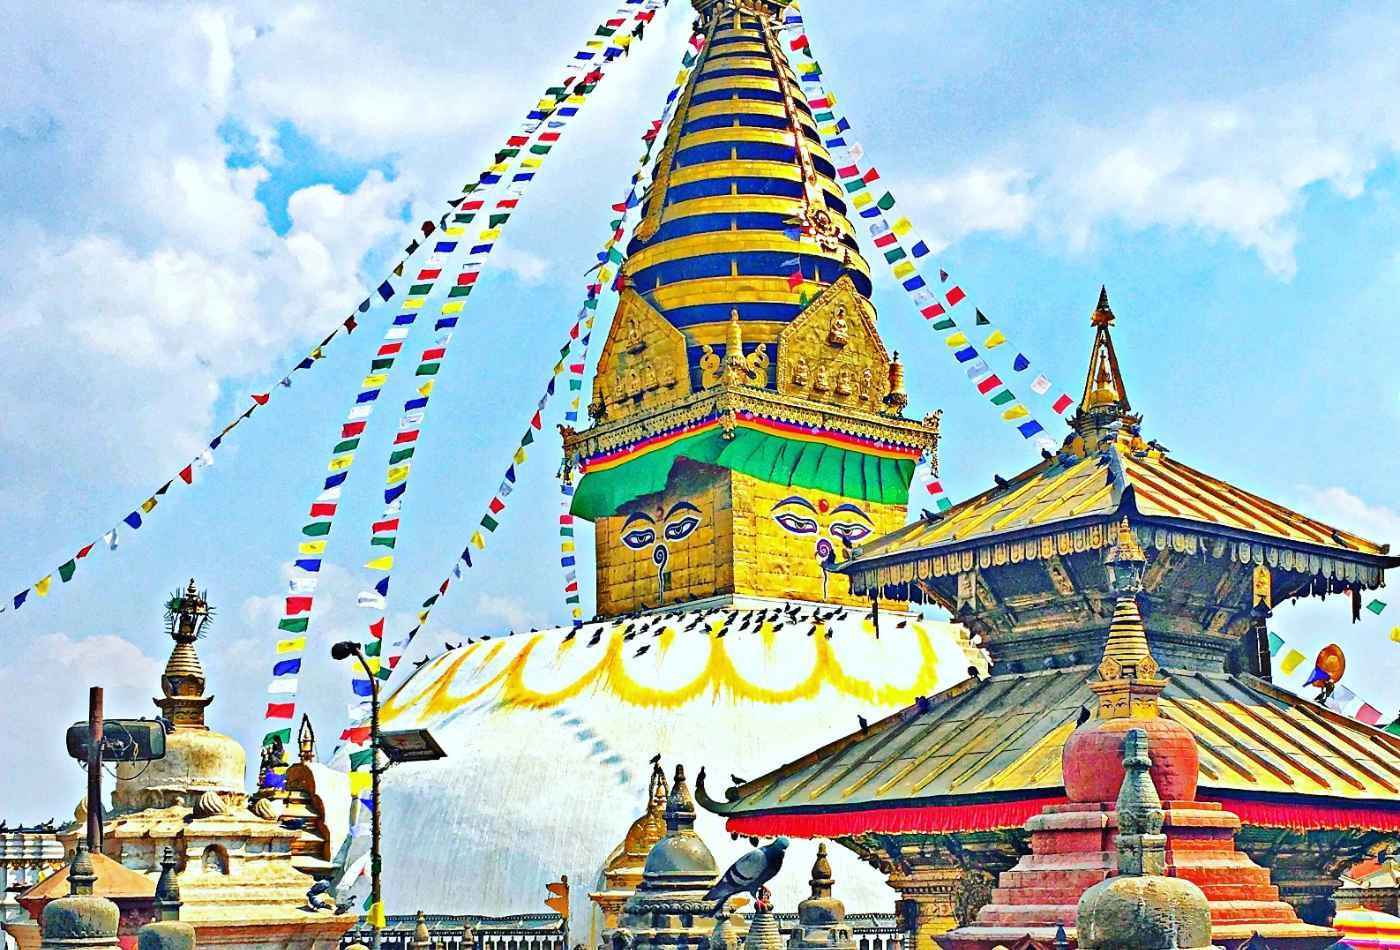 Colorful prayer flags surround the Swayambhunath stupa, and  A smaller temple can be seen standing beside it, with traditional Nepalese architecture.